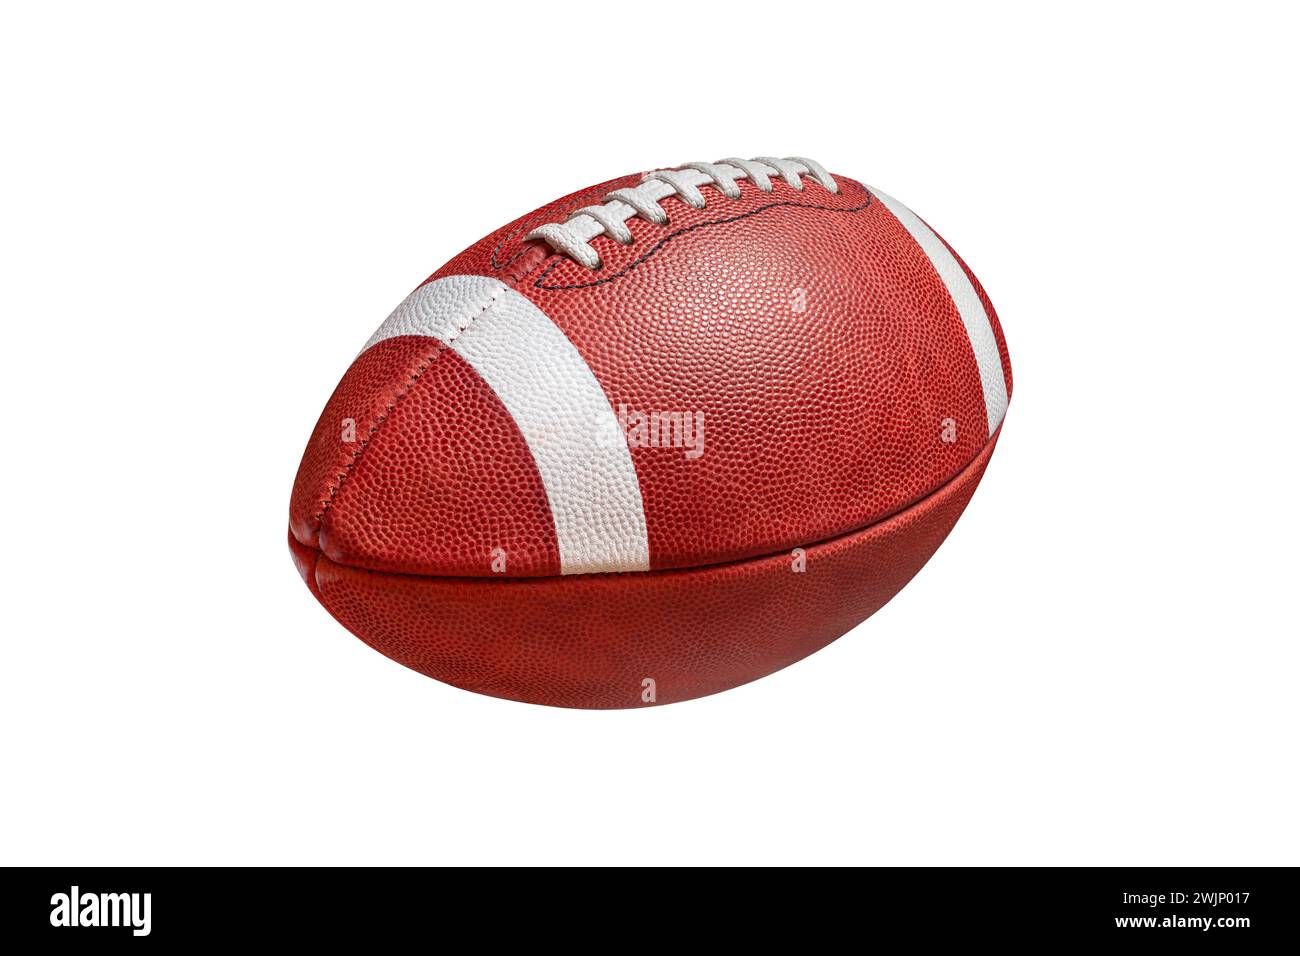 College style leather football isolated on a white background Stock Photo